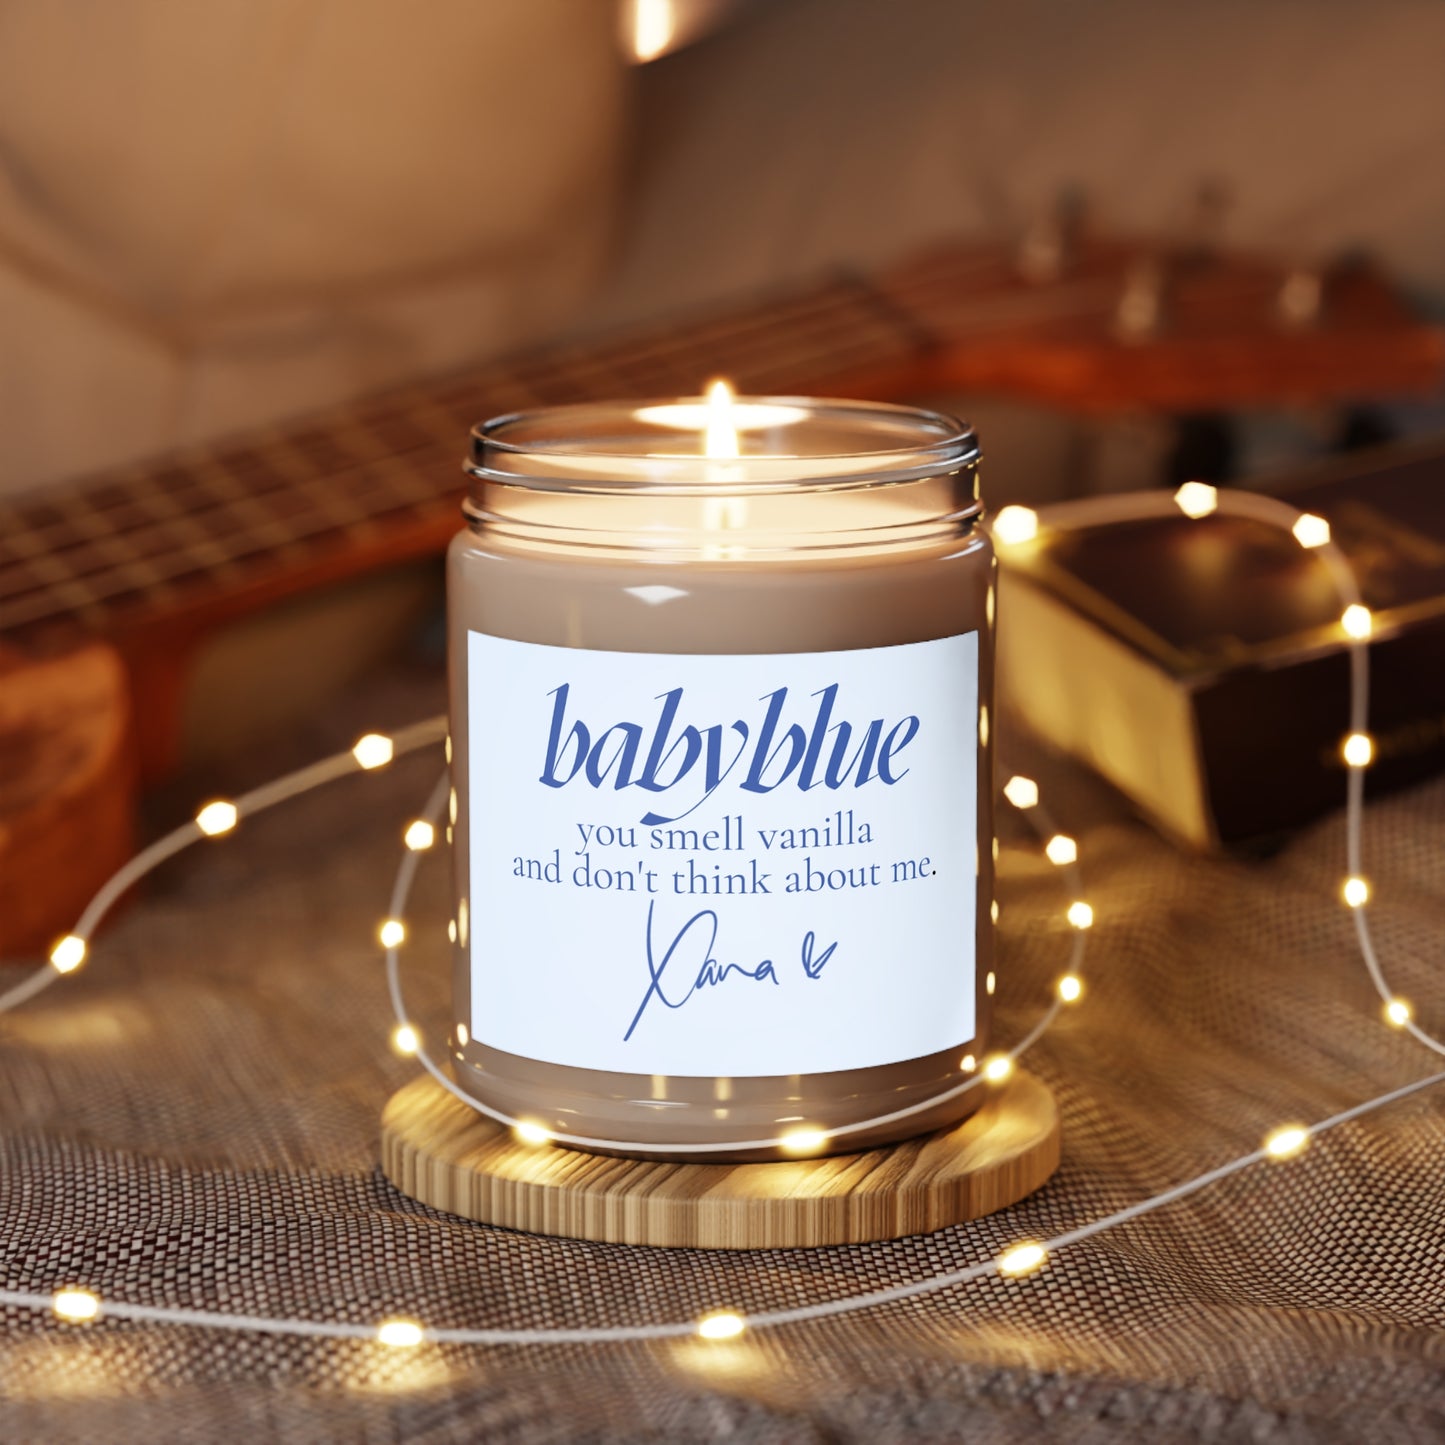 you smell vanilla and don't think about me - babyblue Candle